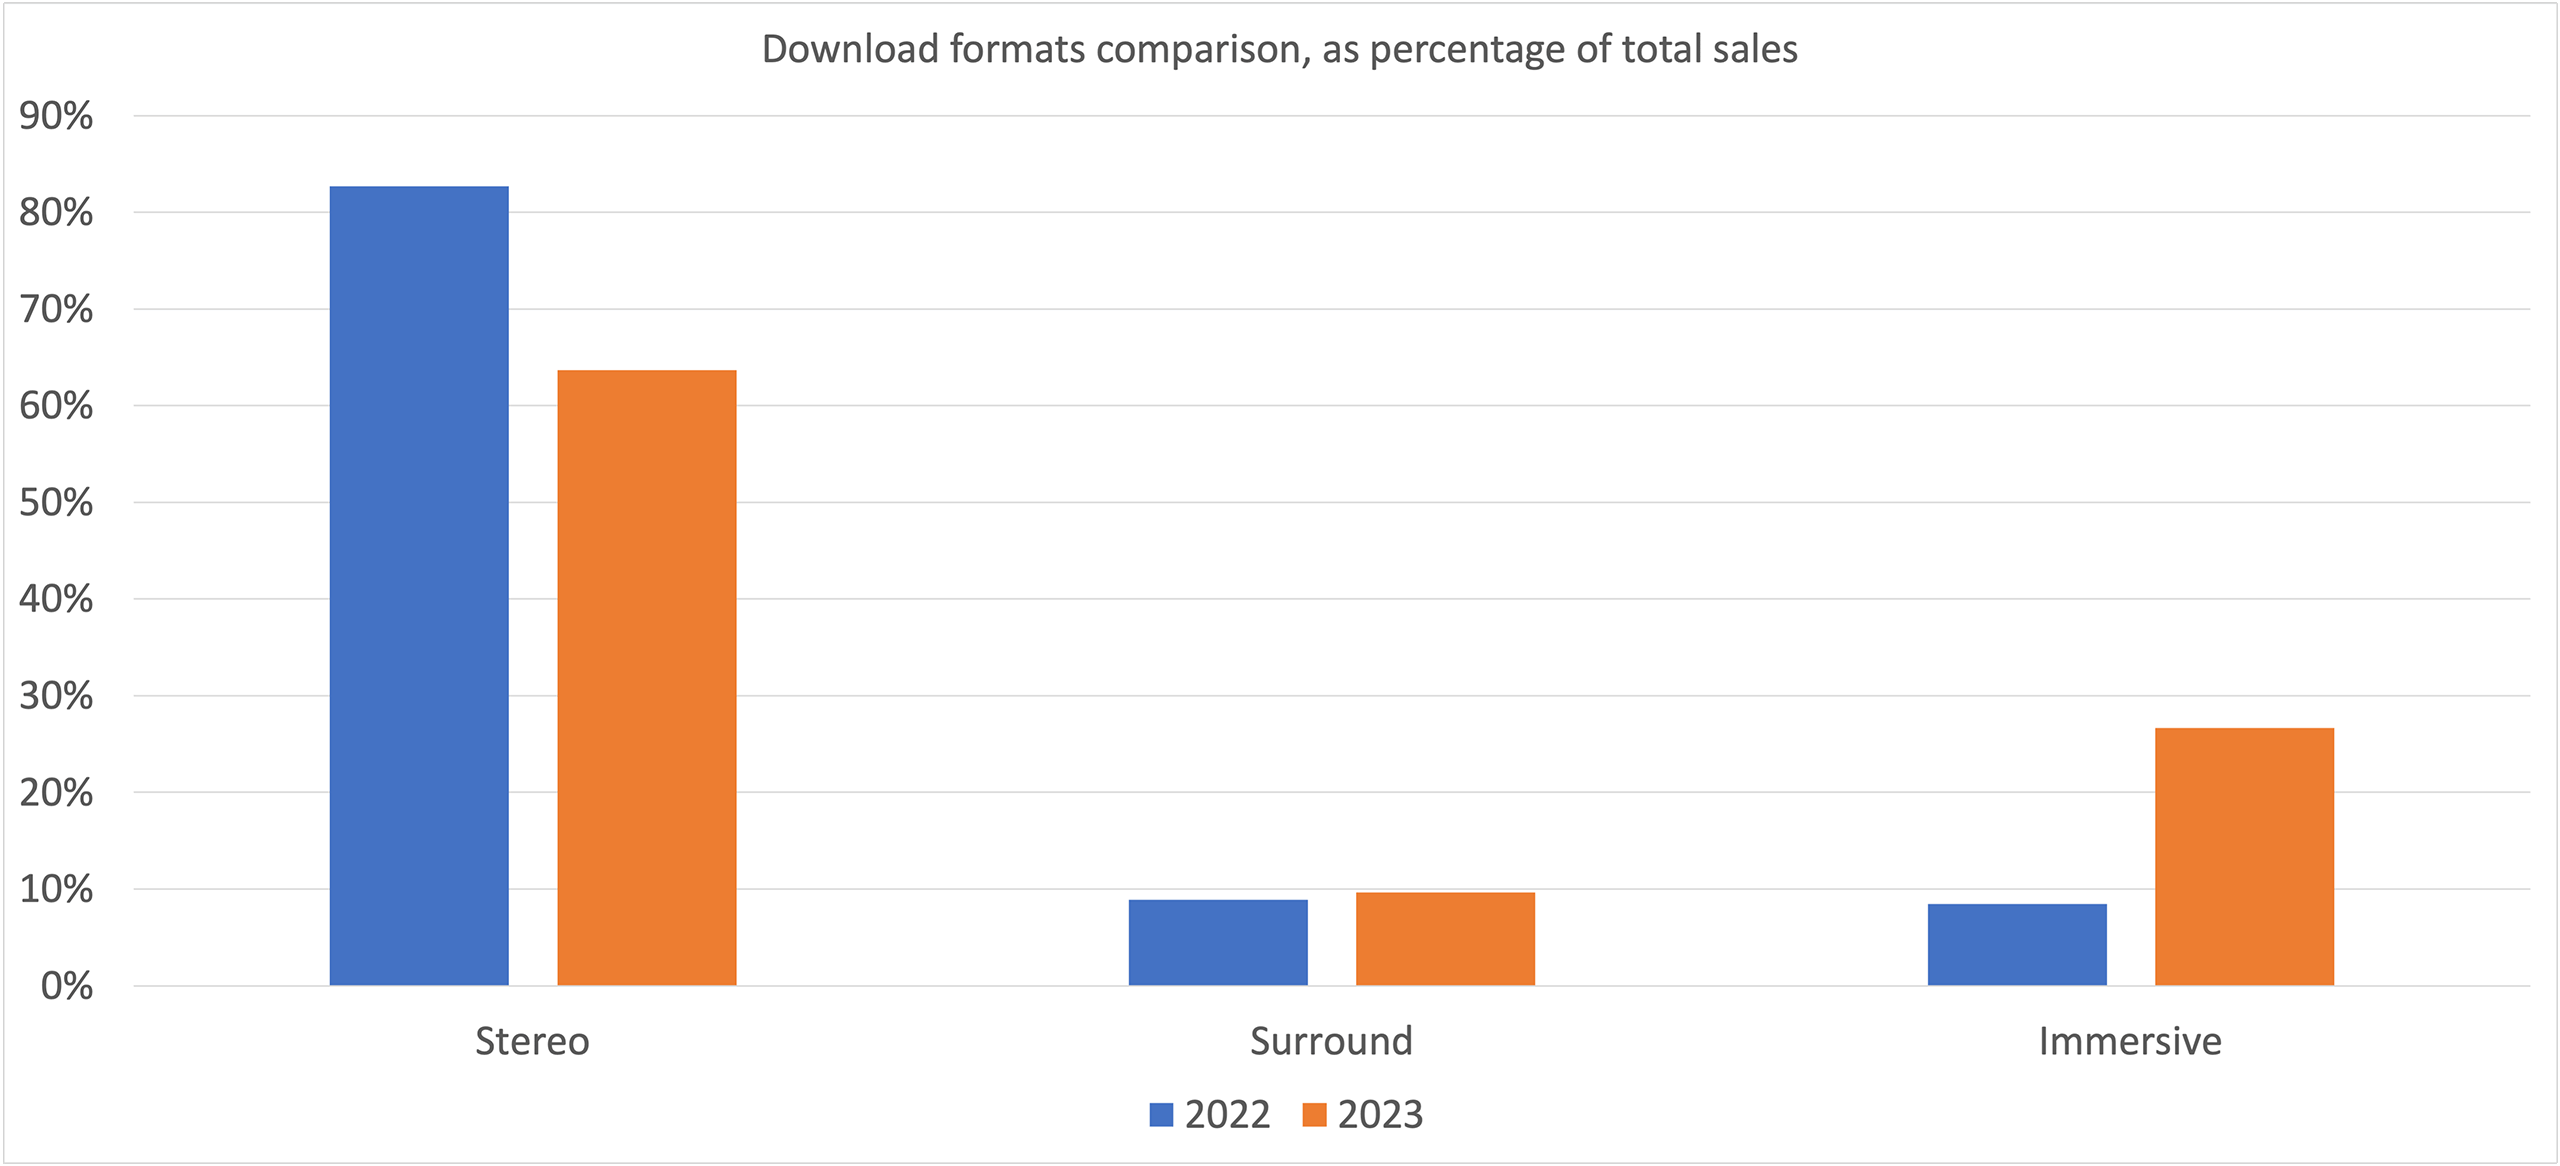 Download formats comparison, as percentage of total sales